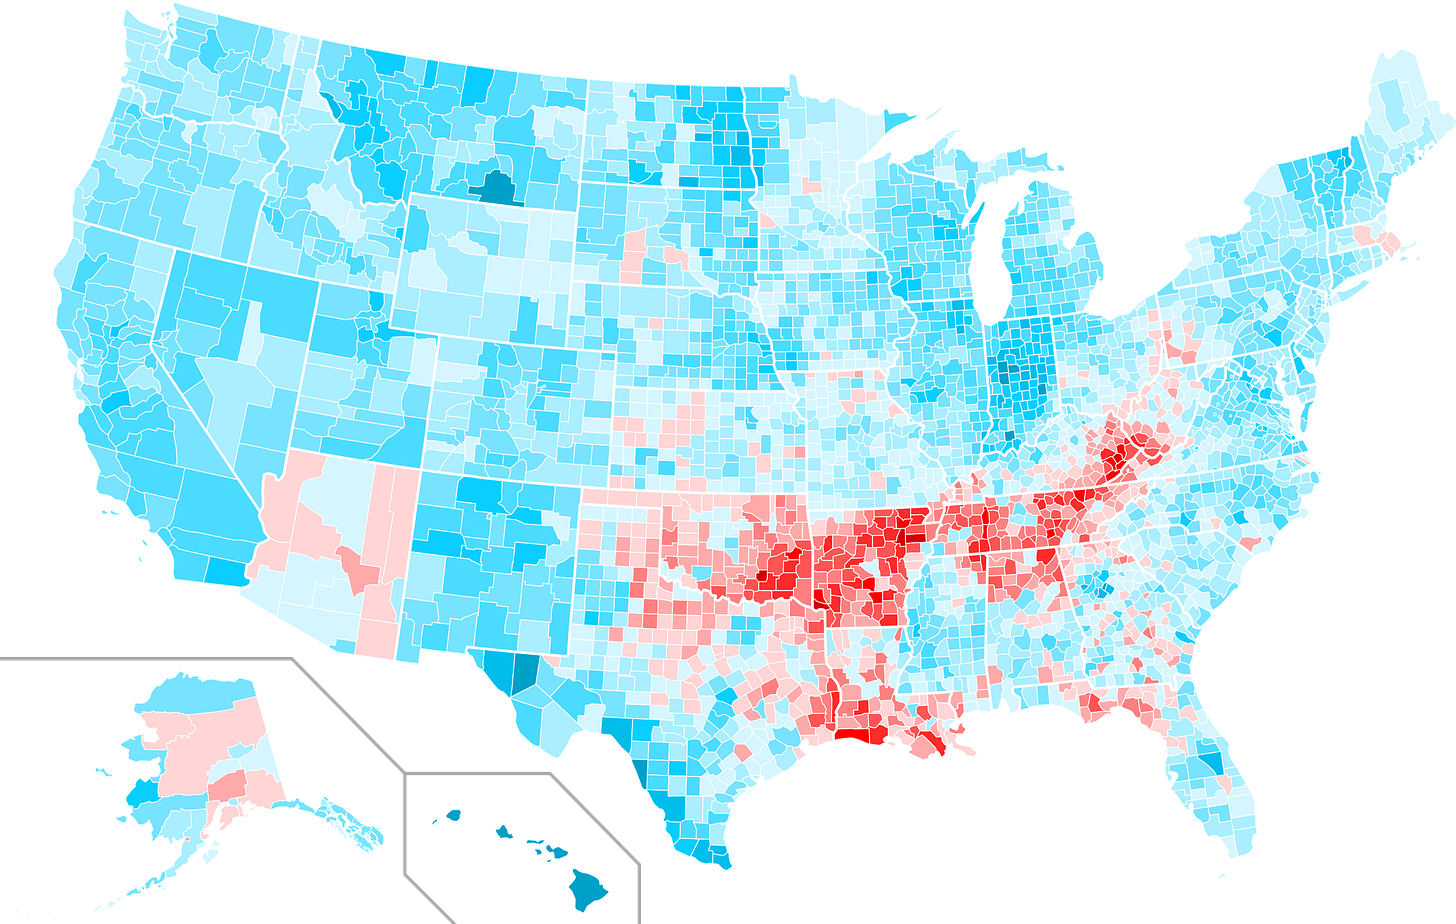 File:Presidential Elections 2004-2008 Swing in County Margins.svg -  Wikimedia Commons